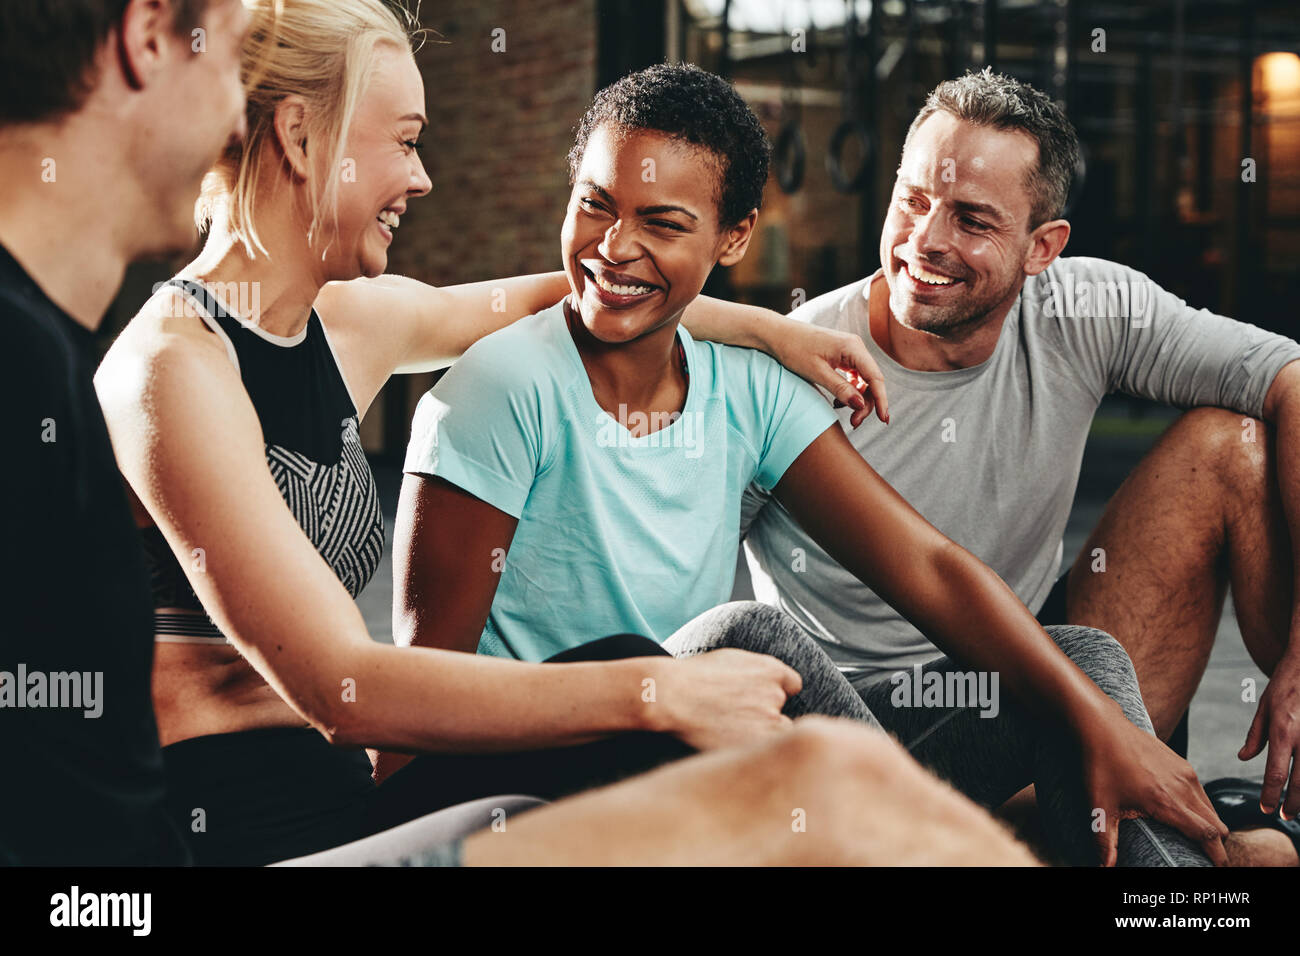 Smiling group of diverse people in sportswear sitting on a gym floor talking and laughing together after a workout class Stock Photo